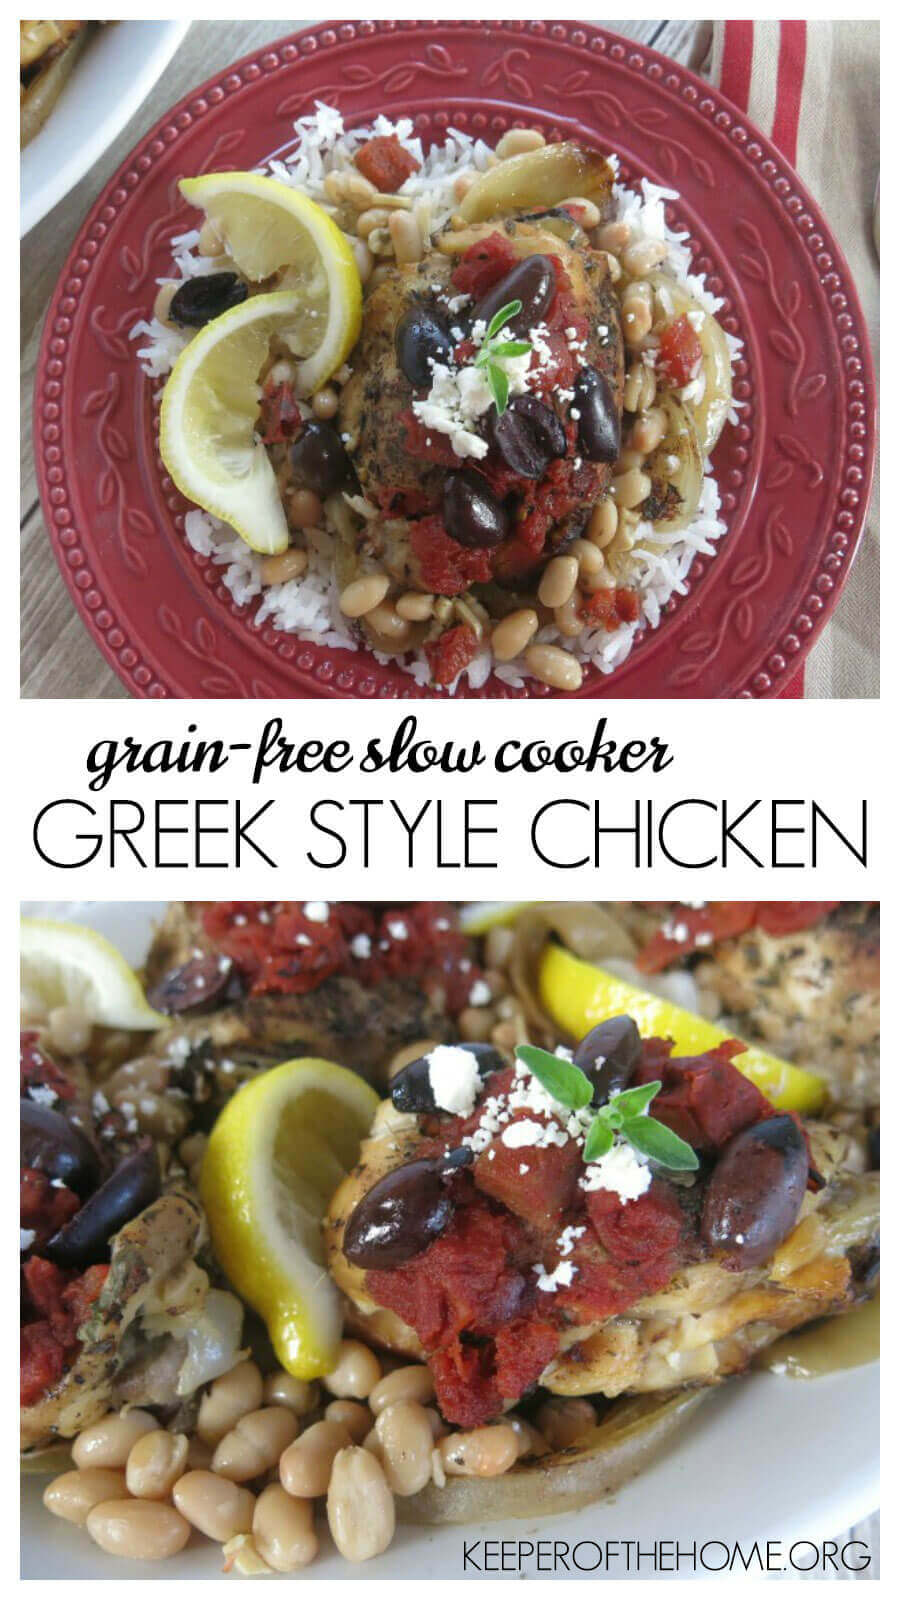 Slow cooking is one of the easiest methods for getting a healthy meal on the table in a snap! This Slow Cooker Greek-Style Chicken is easy – just toss in a few ingredients and you have a healthy meal! Grain-free with a dairy-free option. 